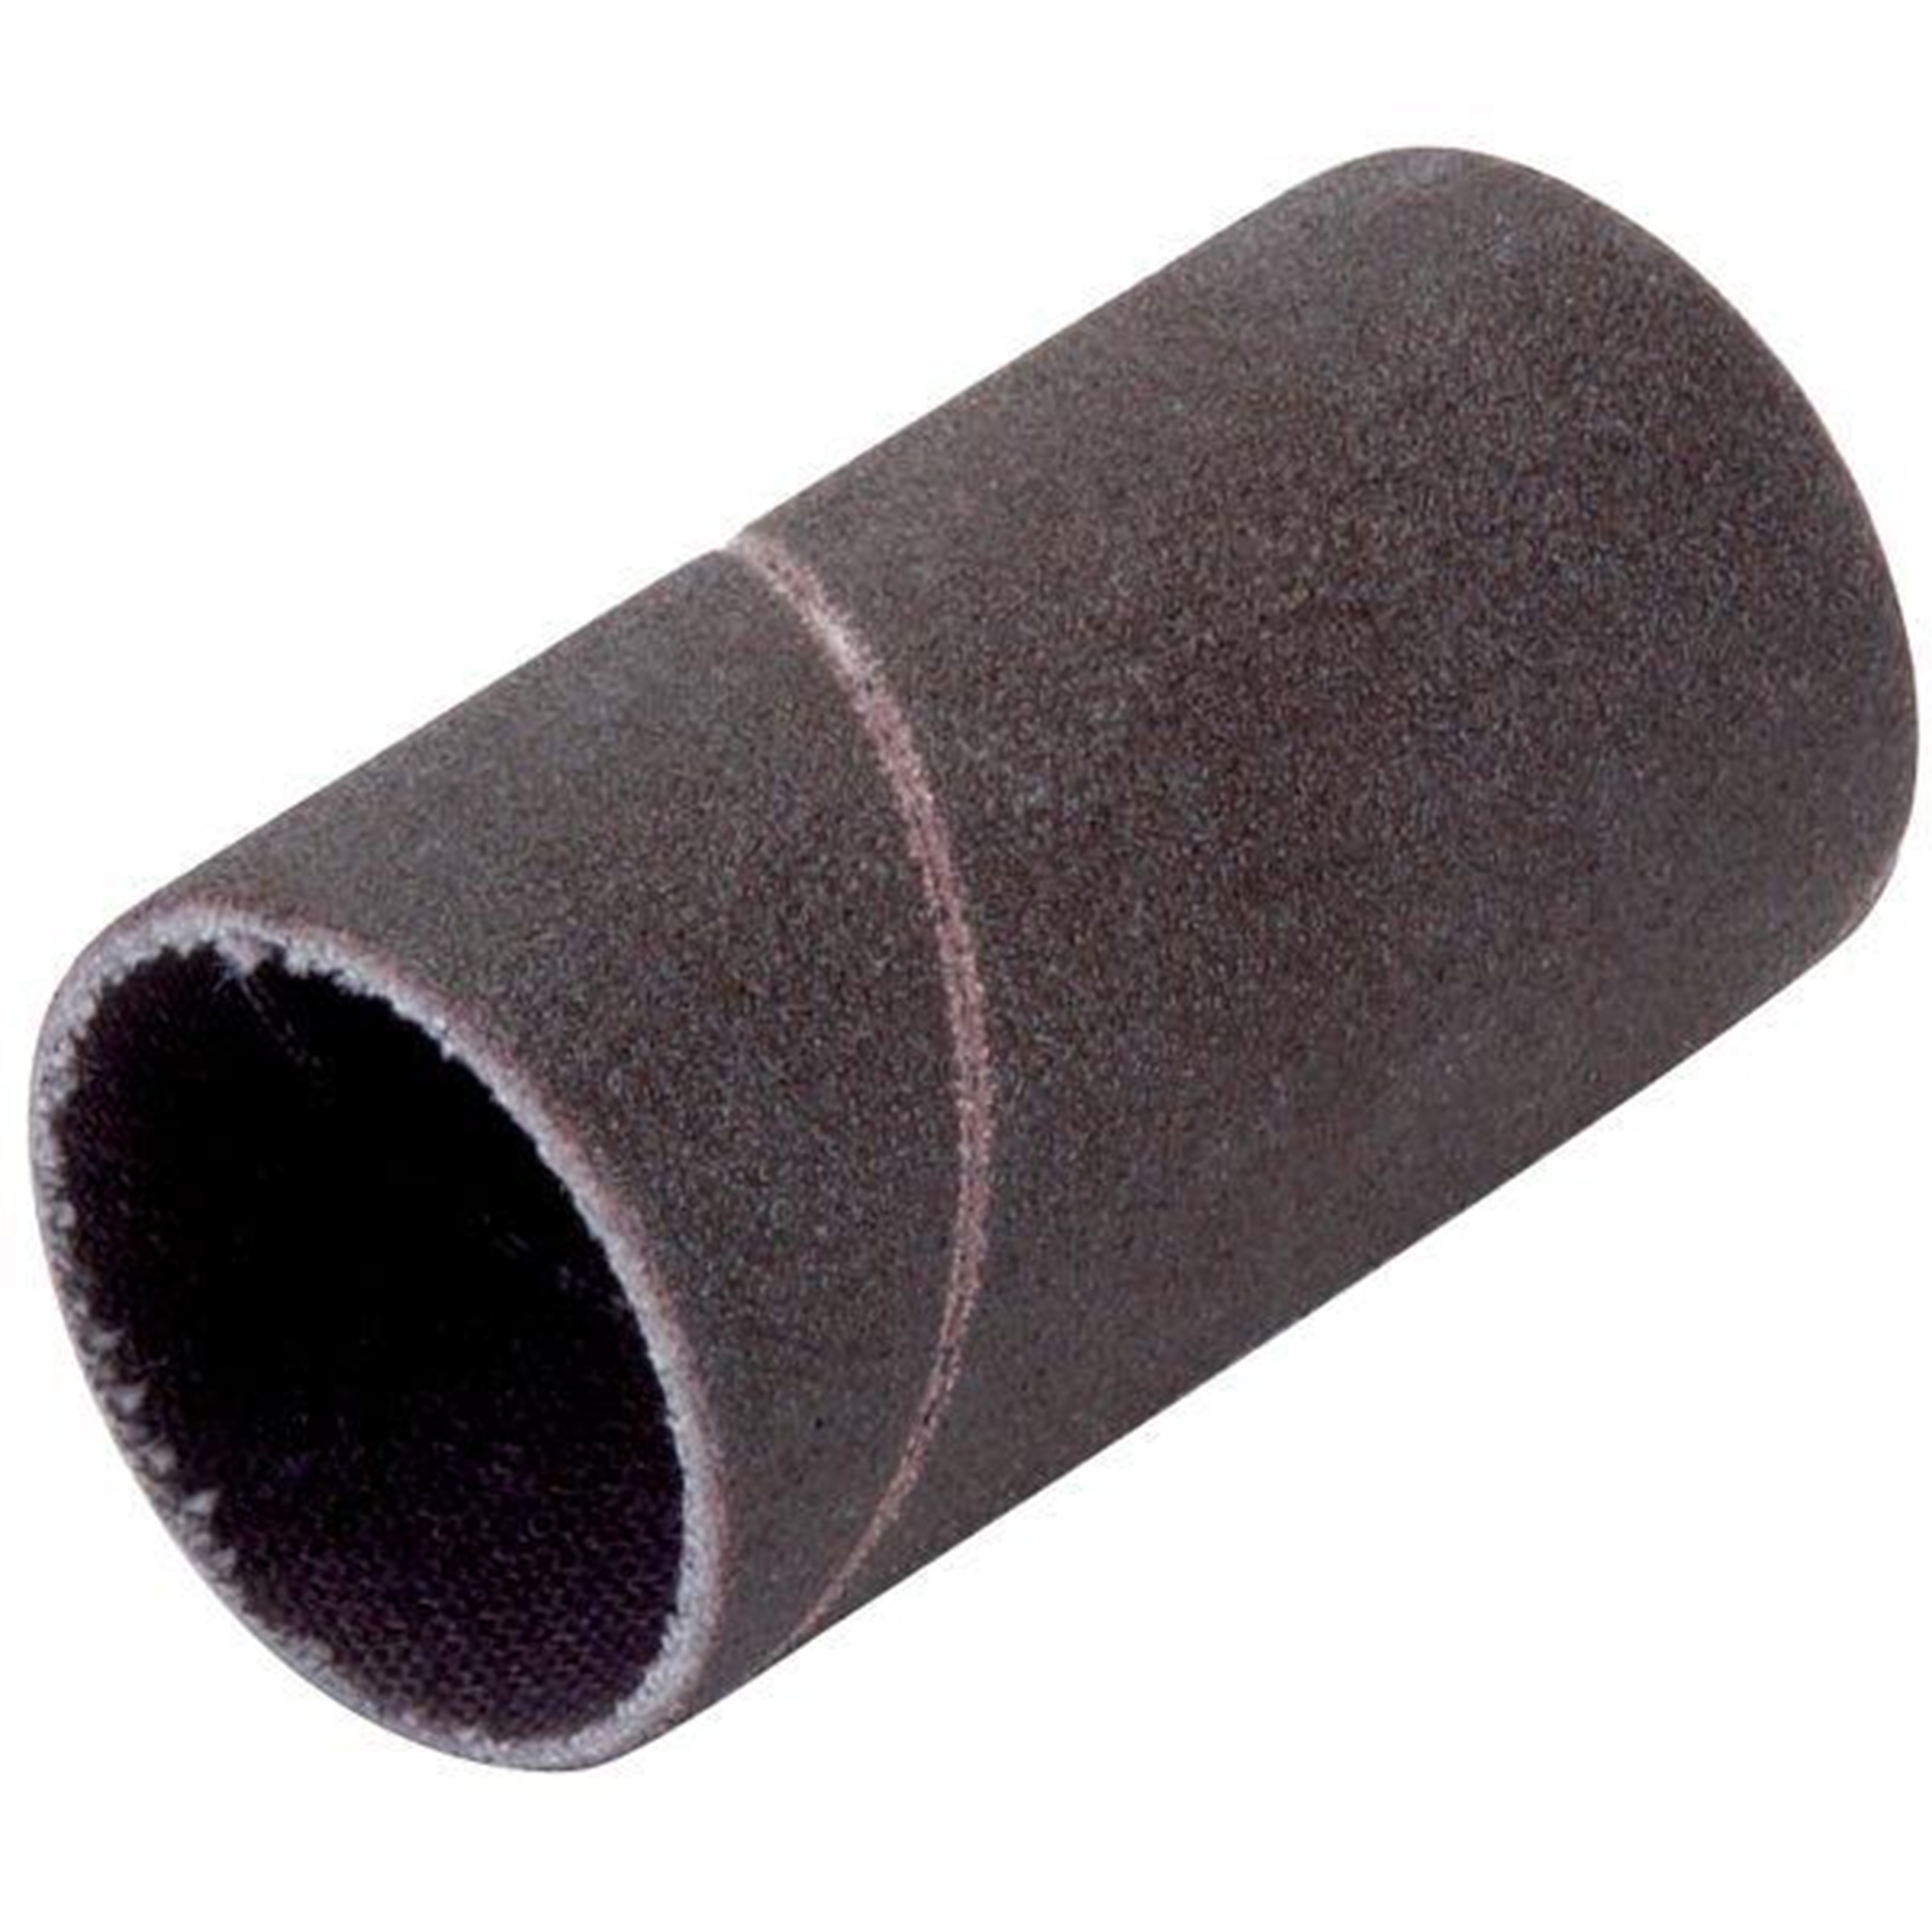 Sanding Drum Replacement Sleeve, 1-1/2" Dia. X 2" Length, 120 Grit, 12 Pack